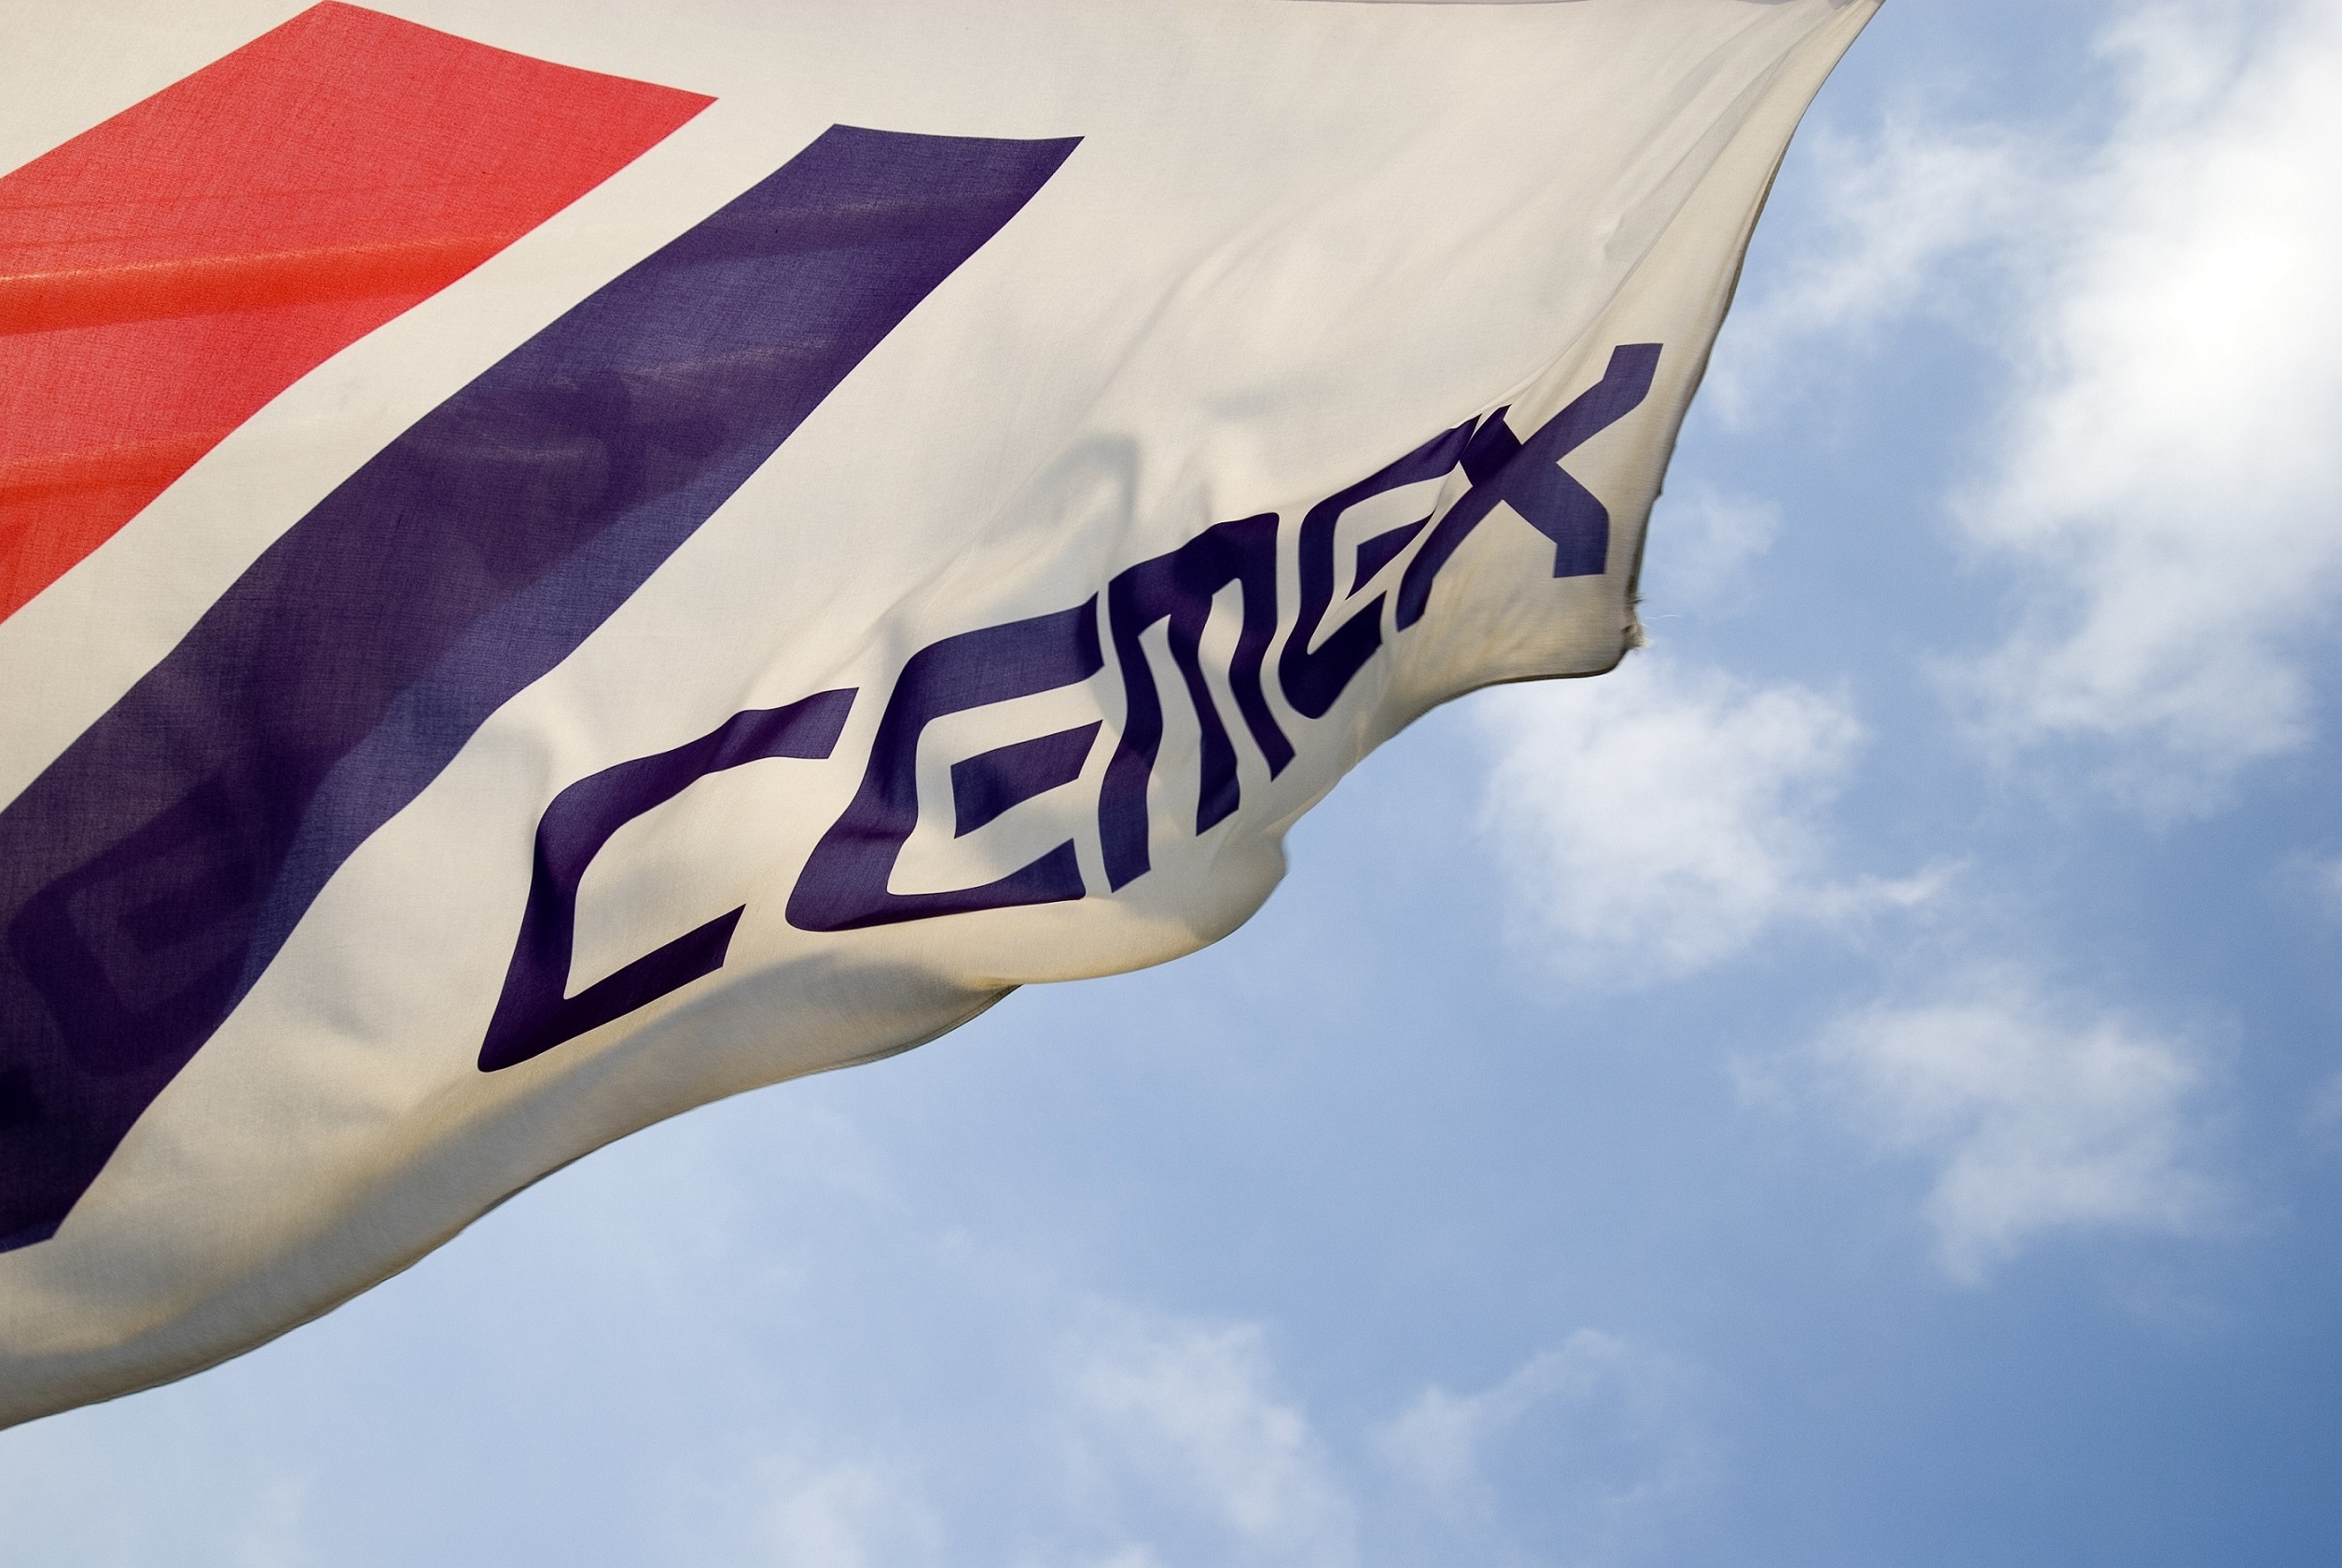 HCL will focus on global end-to-end transformation of CEMEX's IT lifecycle management